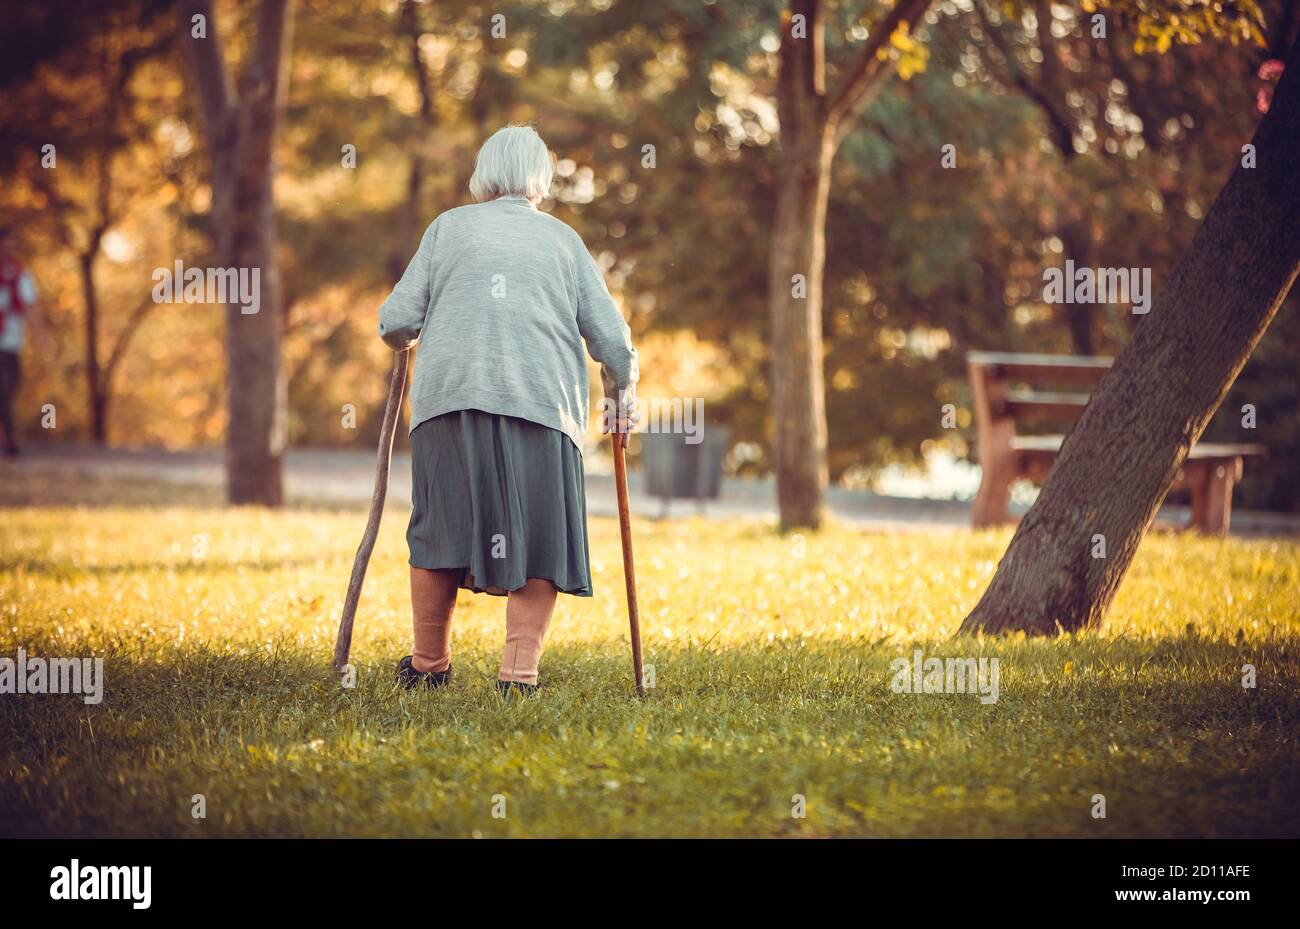 Senior woman with canes walking in autumn park, rear view Stock Photo